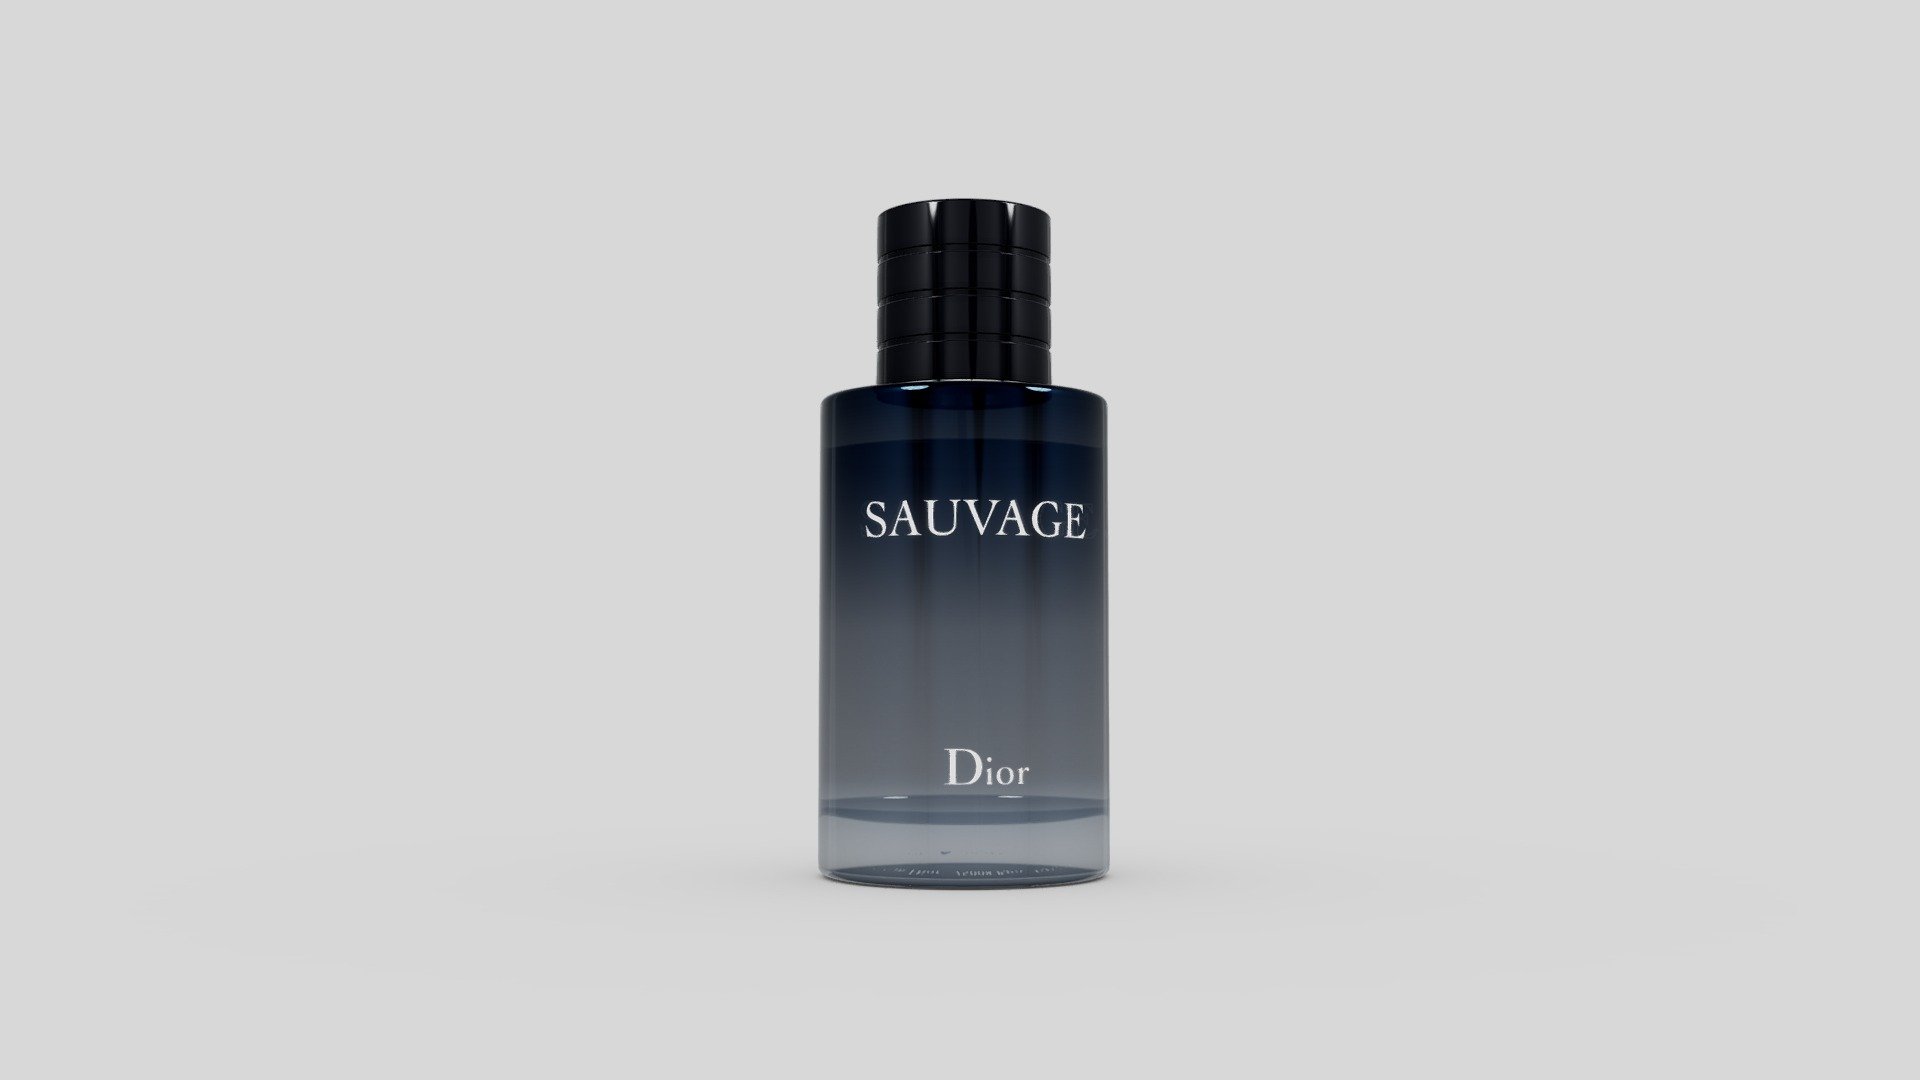 DIOR Sauvage EauDeToilette Perfume model
VR and game ready for high quality Architectural Visualization - DIOR  Sauvage EauDeToilette Perfume - 3D model by Invrsion 3d model